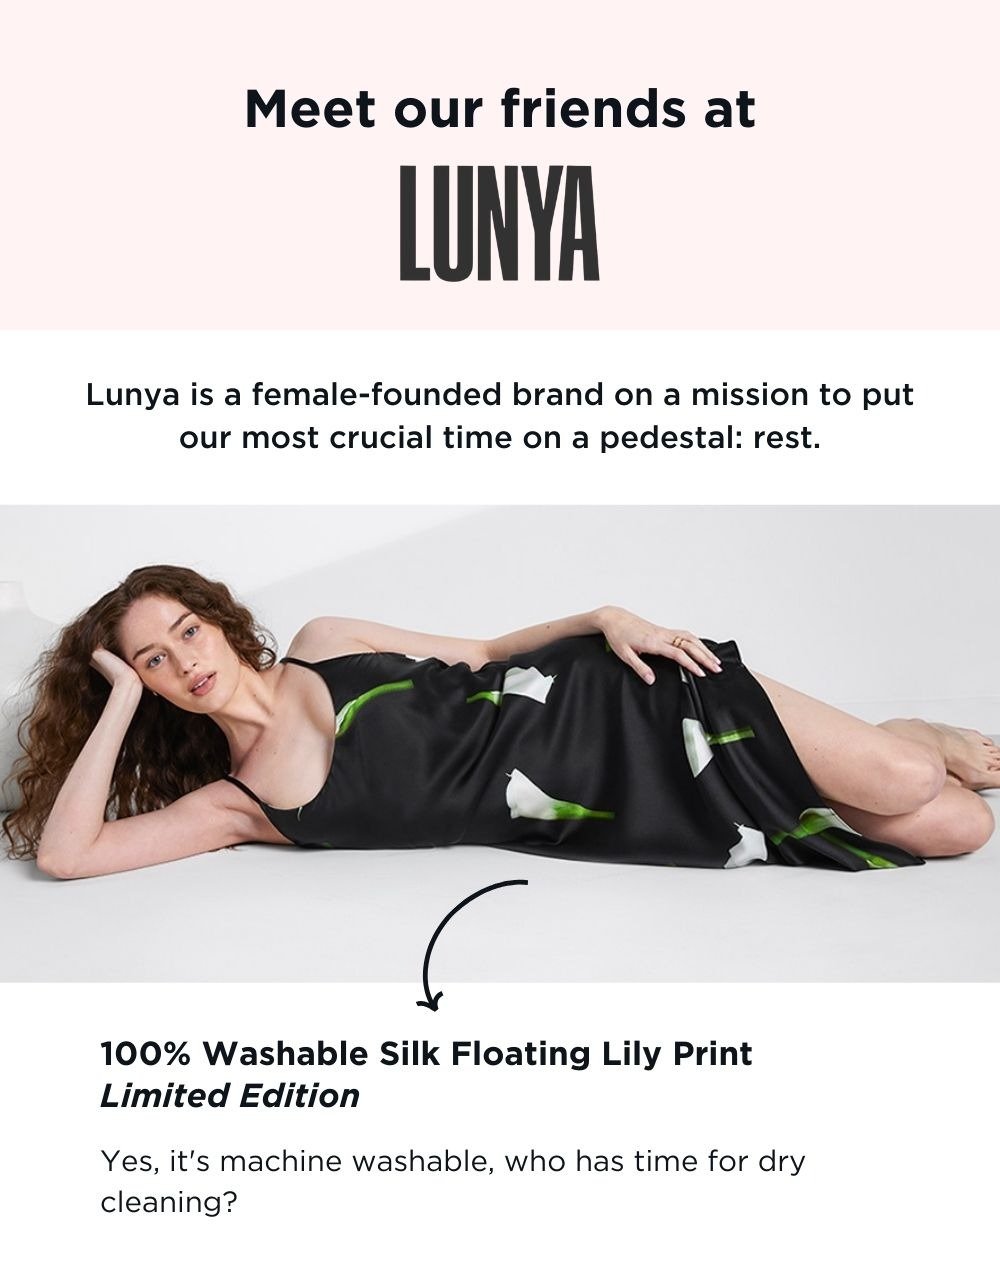 Meet our friends at LUNYA. Lunya is a female-founded brand on a mission to put our most crucial time on a pedestal: rest. 100% Washable Silk Floating Lily Print Limited Edition: Yes it's machine washable, who has time for dry cleaning?